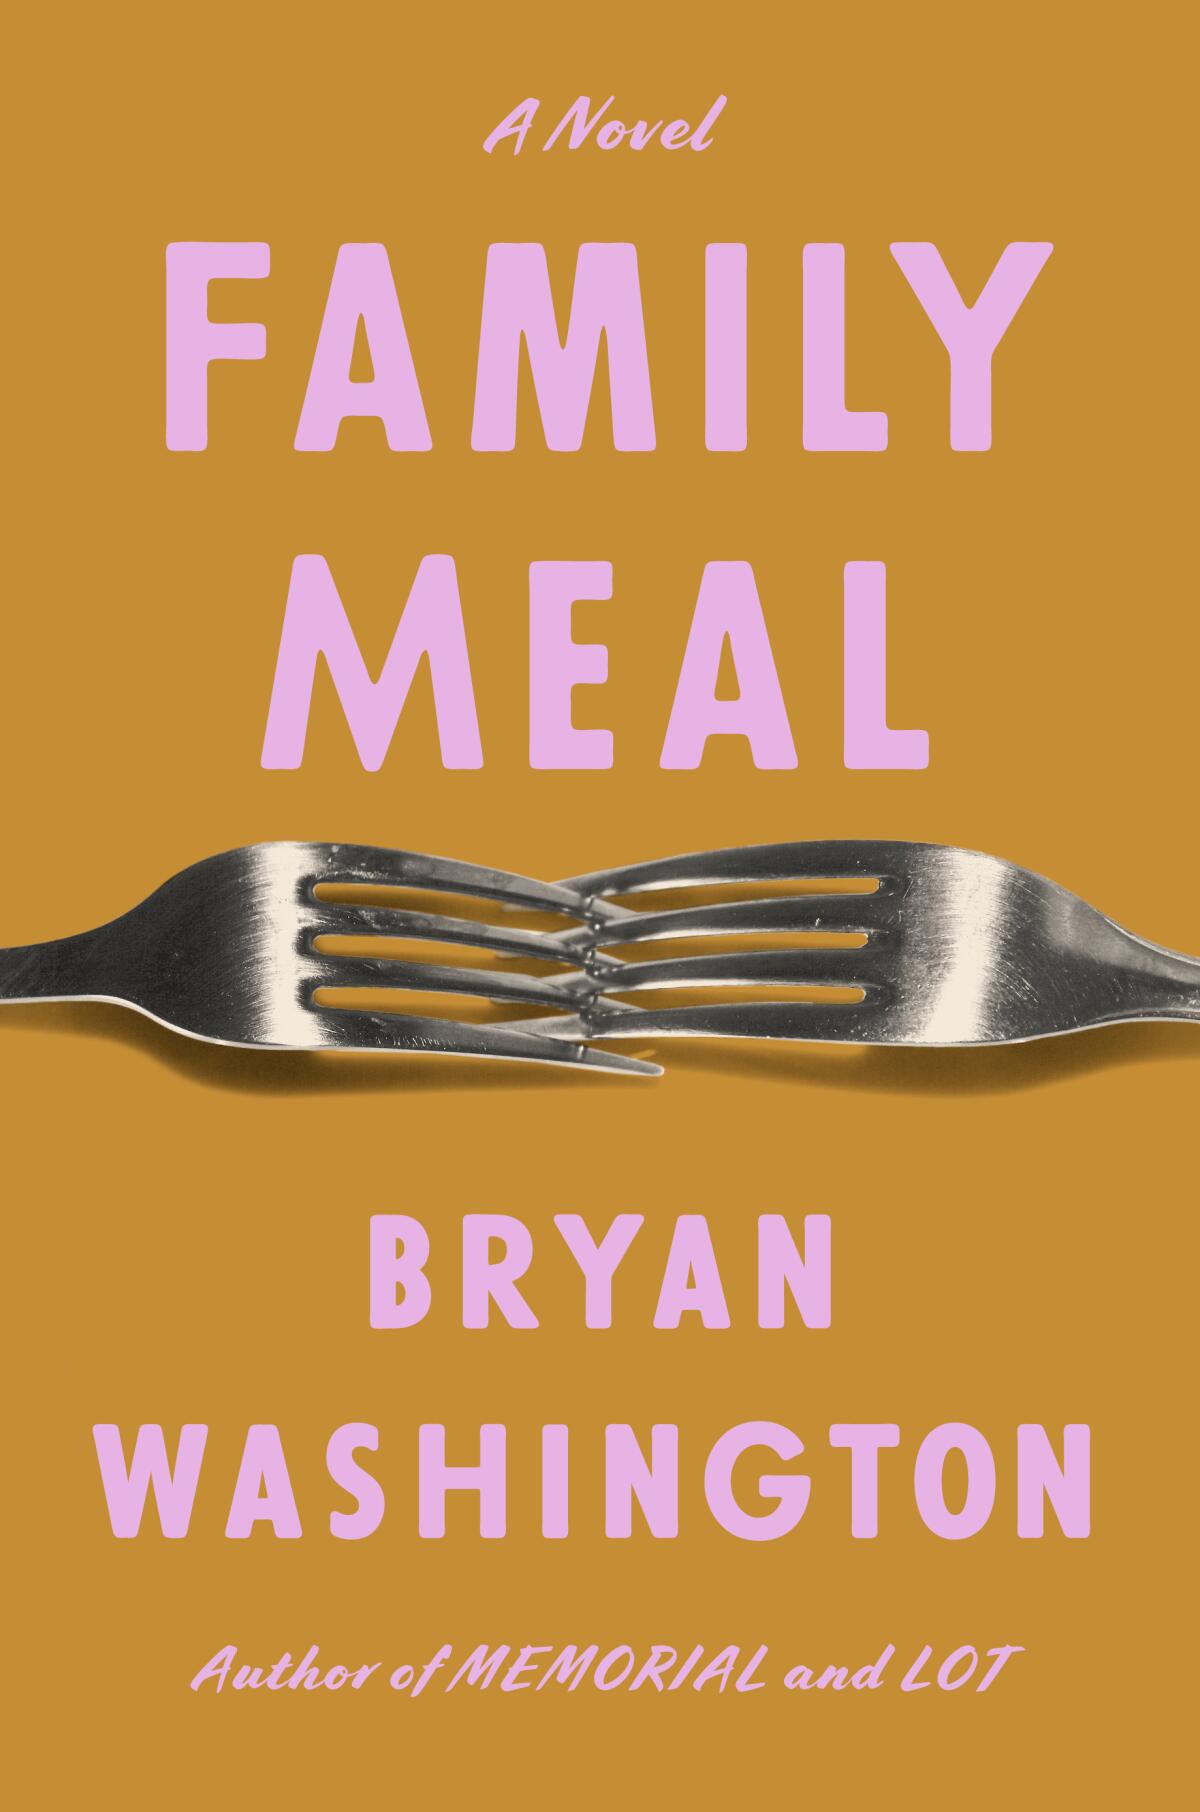 The cover of "Family Meal" by Bryan Washington, featuring two forks intertwining.